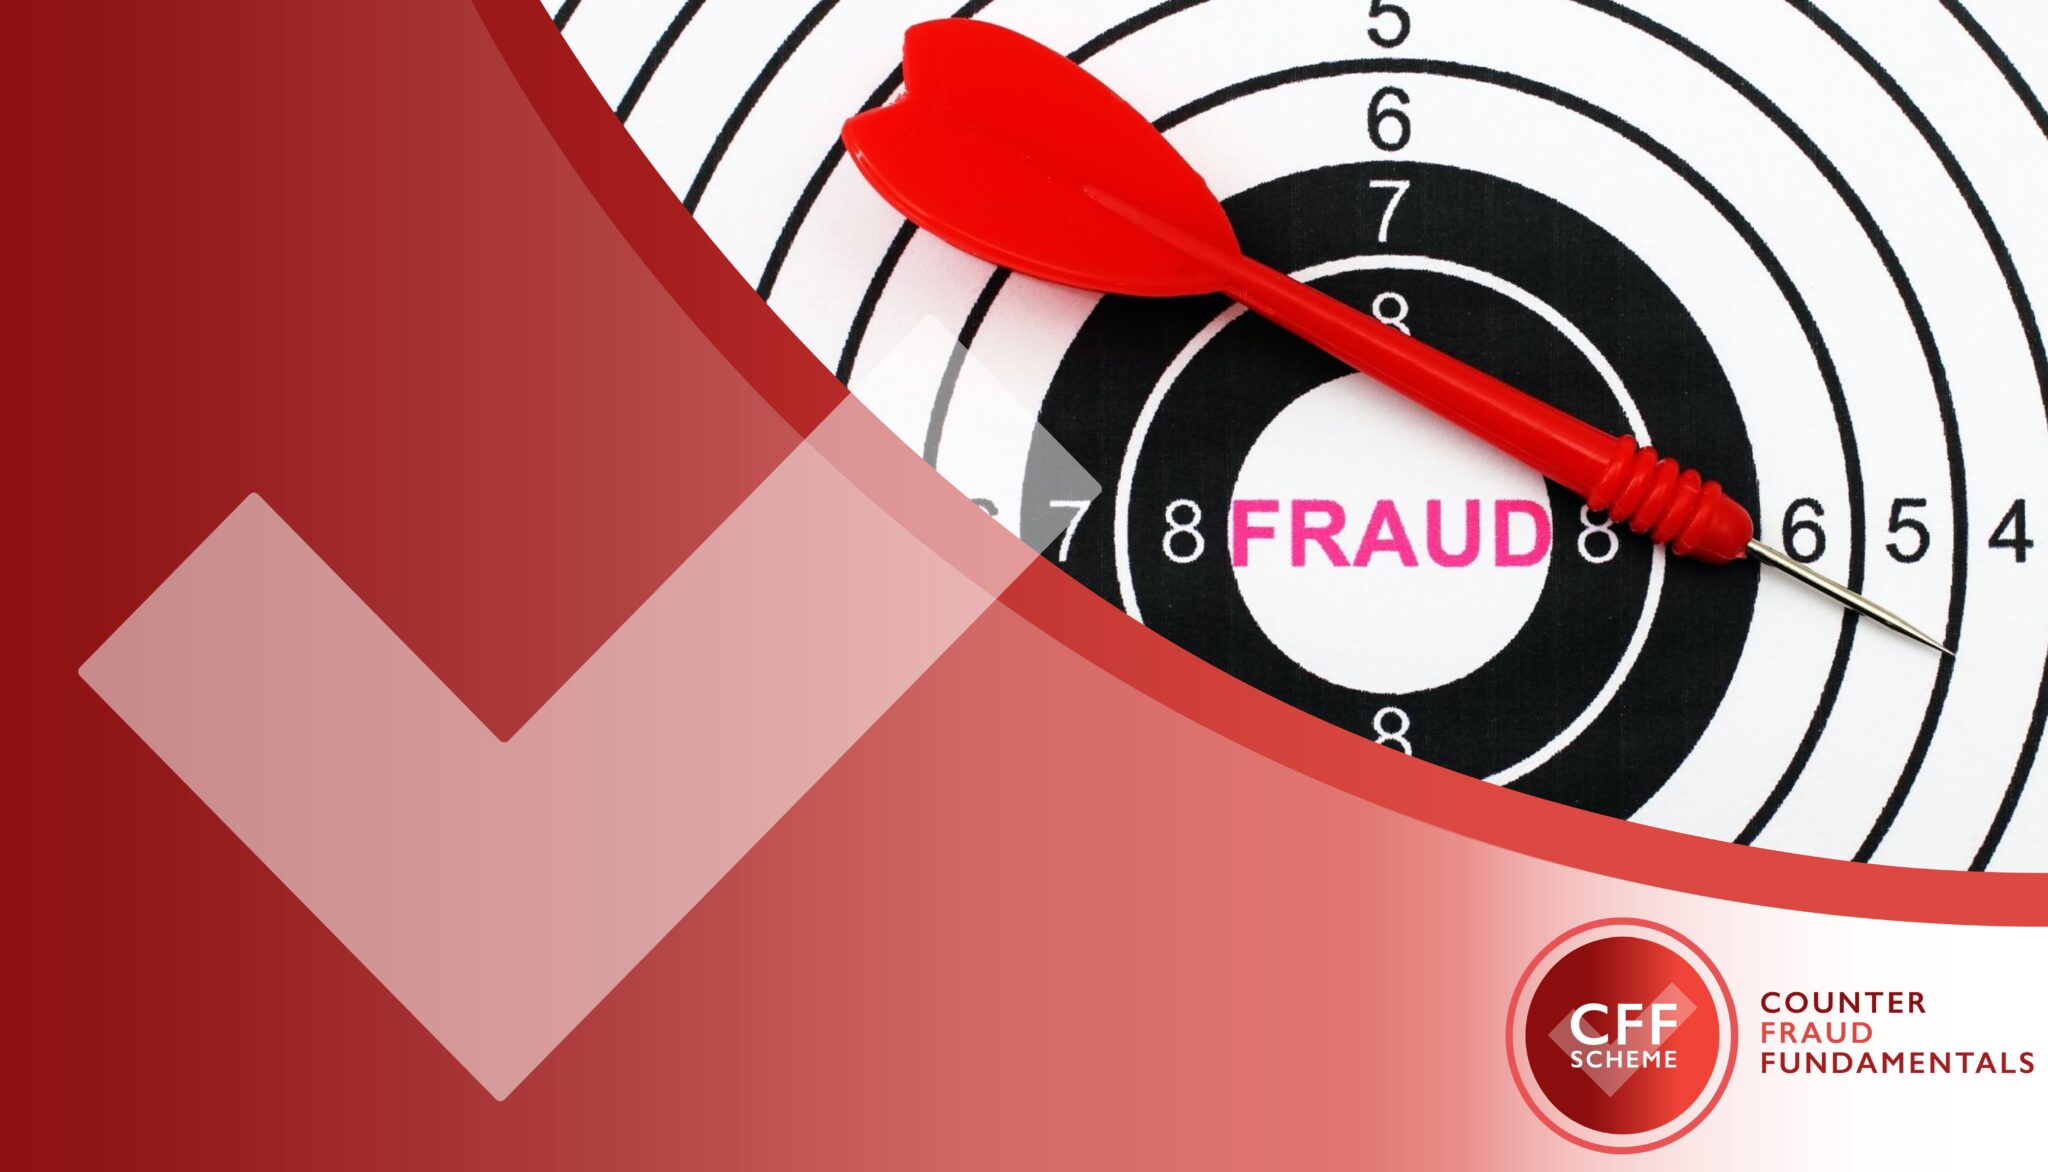 What are the Counter Fraud Fundamentals?